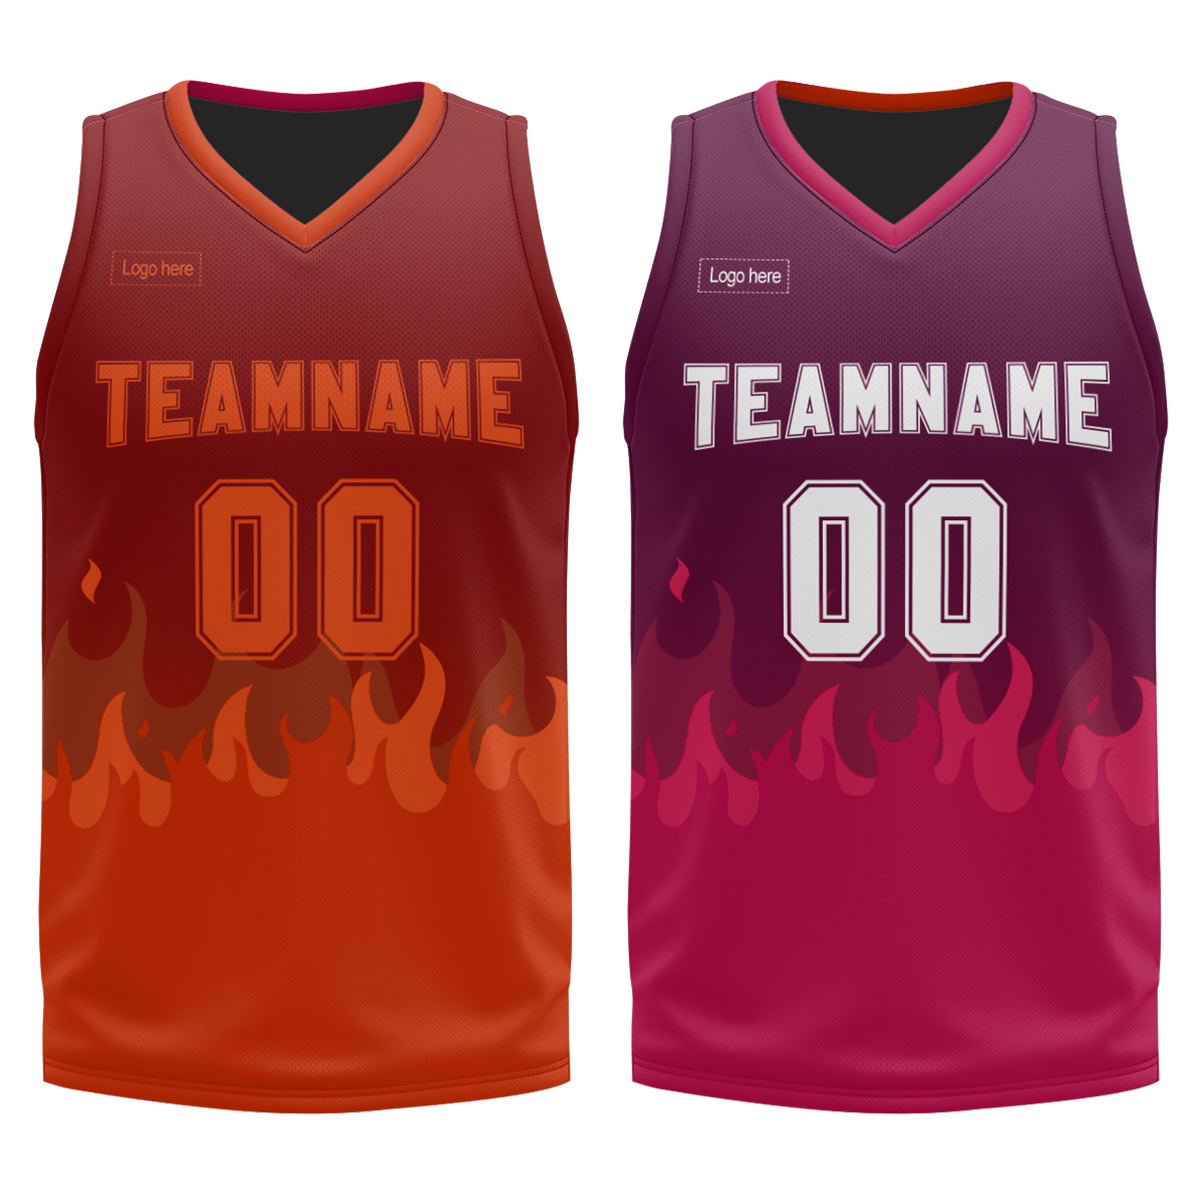 wholesale-new-blank-team-basketball-jerseys-printing-design-your-own-basketball-uniforms-for-men-and-women-at-cj-pod-4